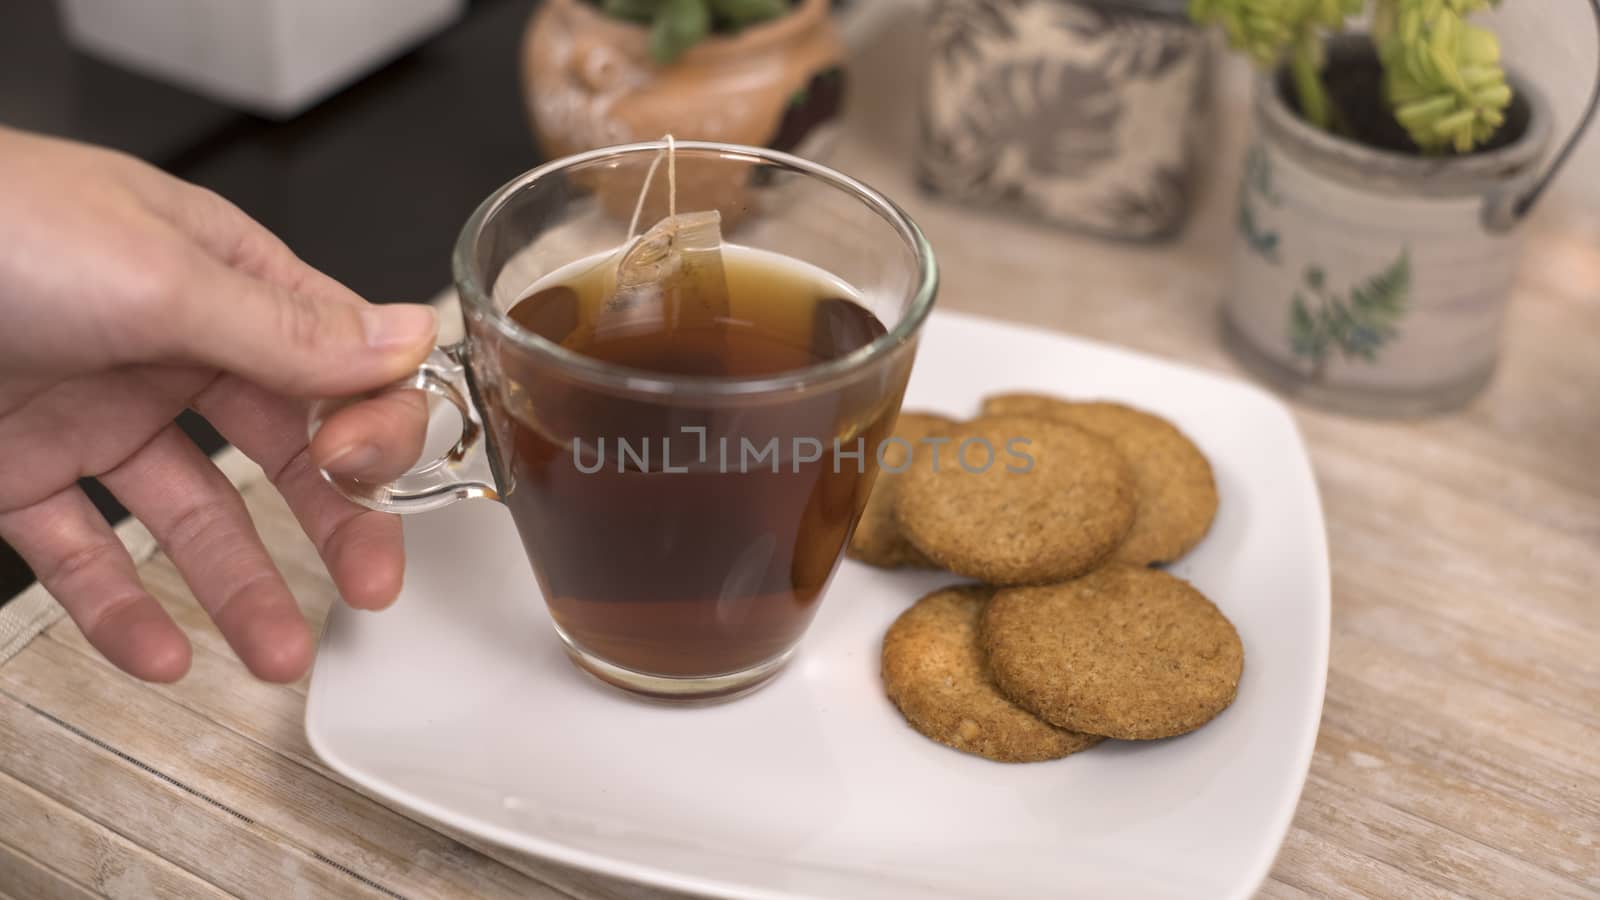 Relaxation concept: woman's hand takes a cup of tea from a plate with biscuits on a small table with candles little plants in bokeh effect